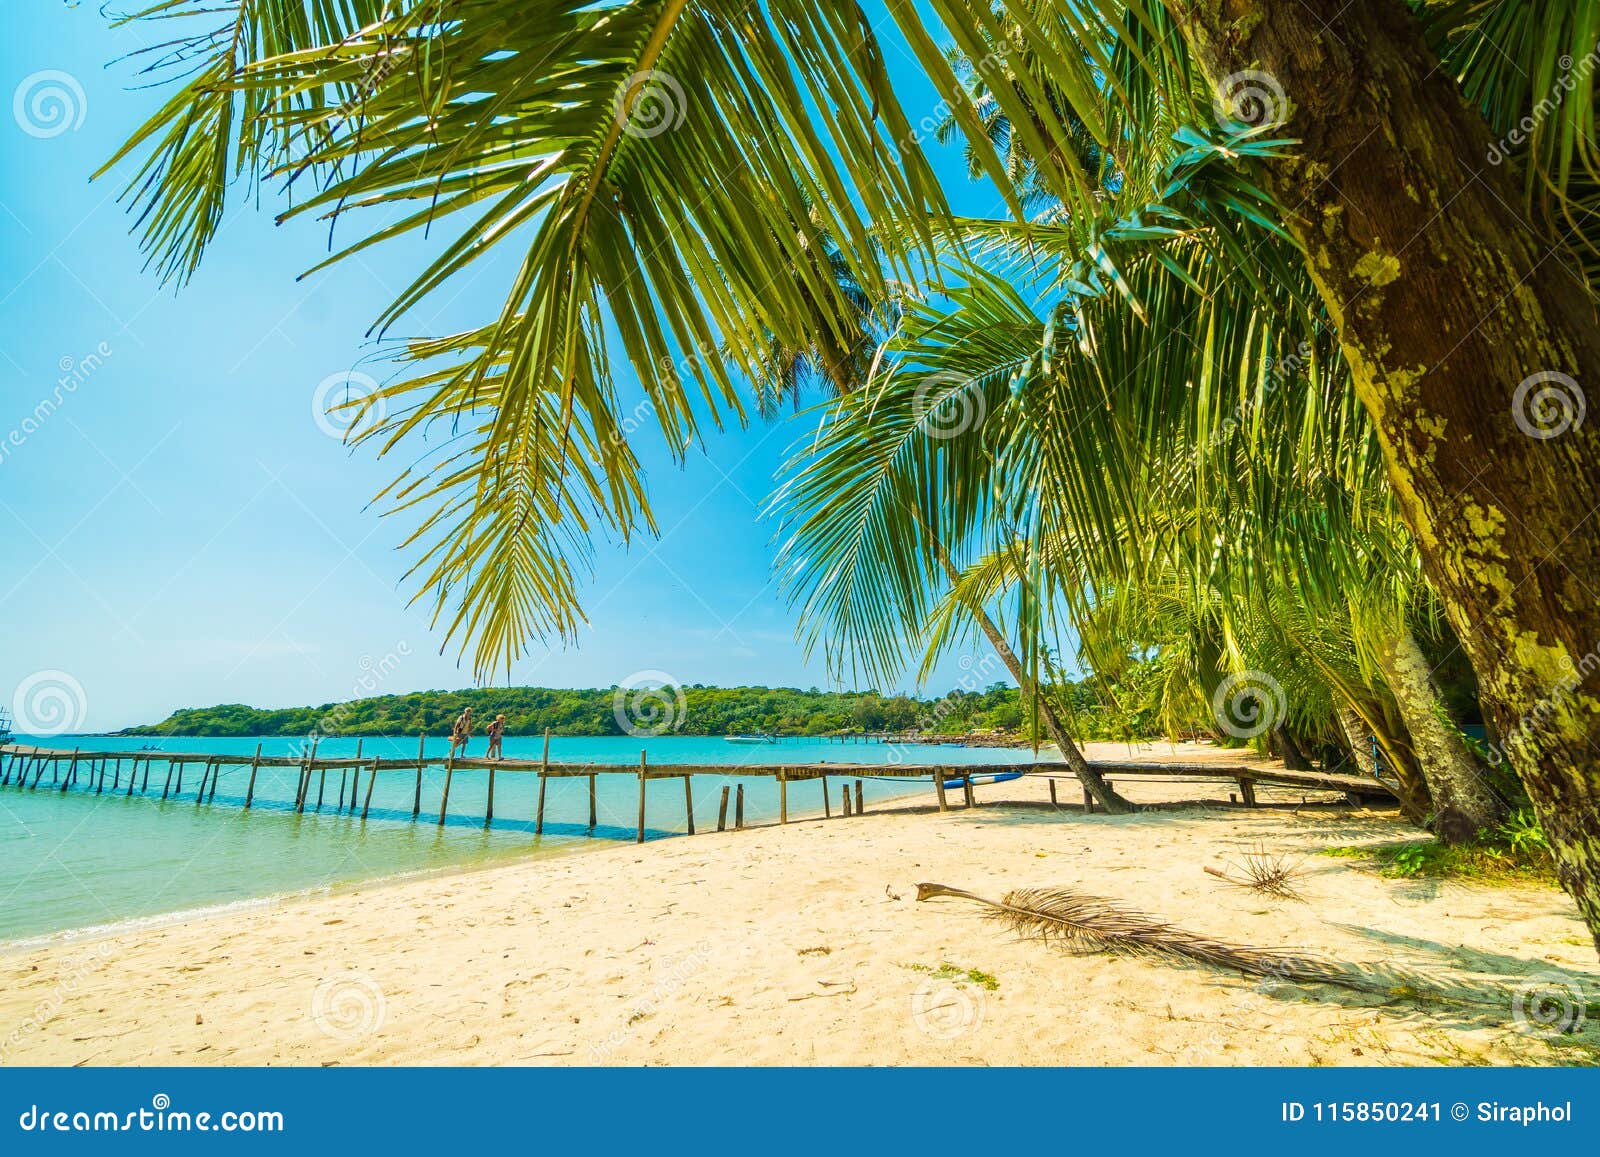 Beautiful Tropical Beach And Sea With Coconut Palm Tree In Paradise Island Stock Image Image